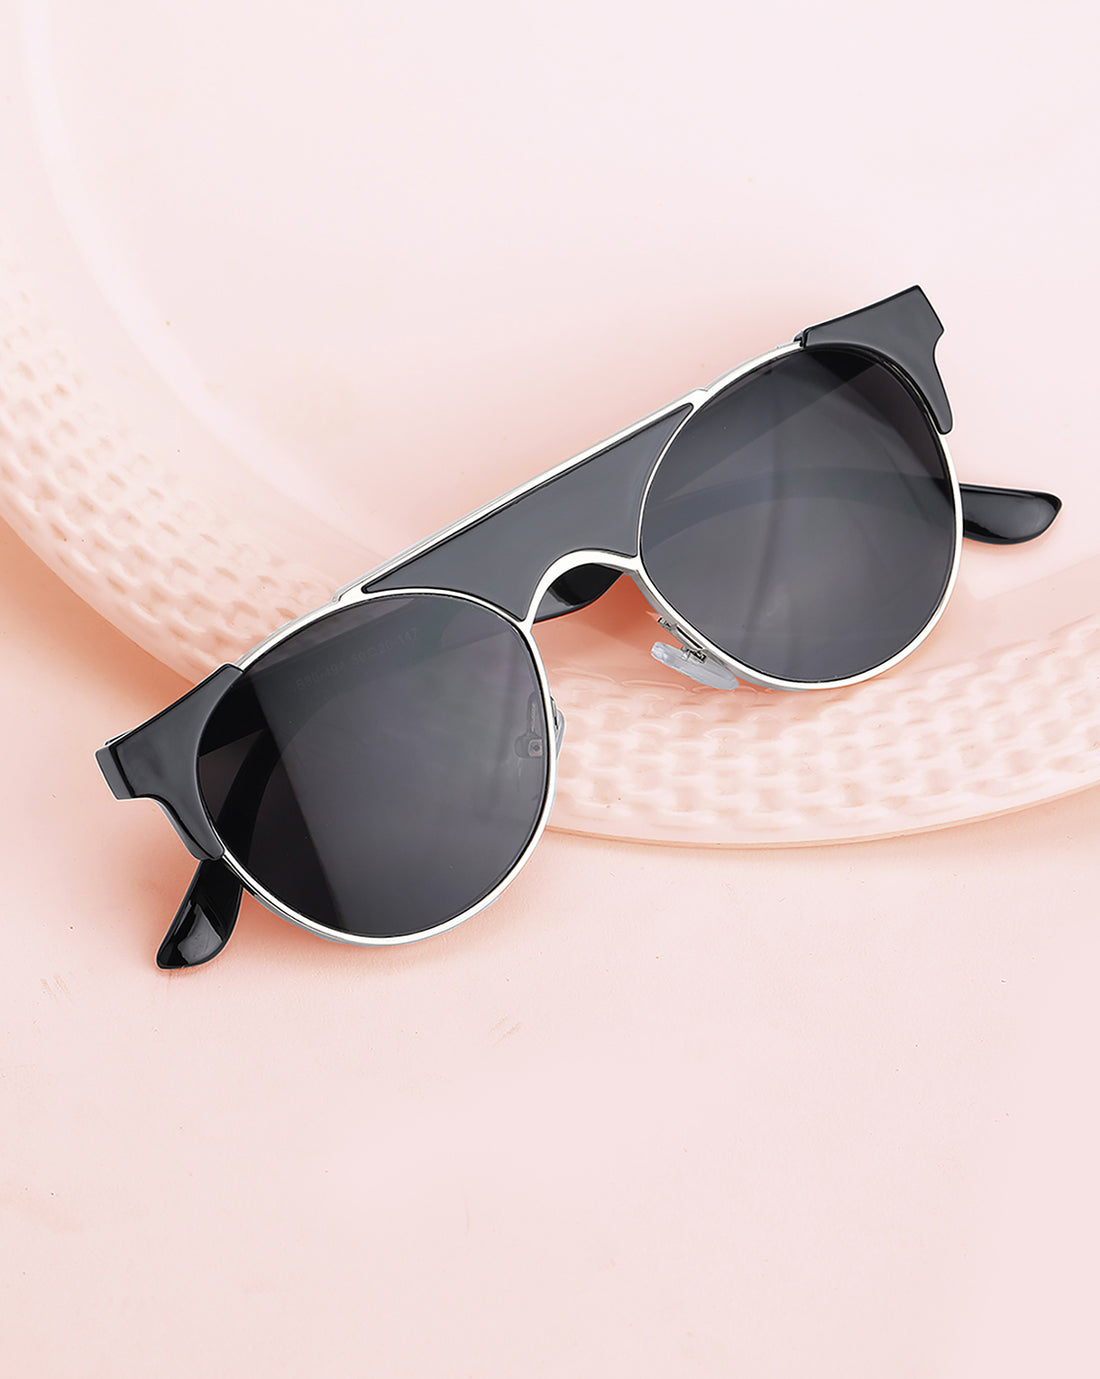 Carlton London Distintive/Unique Sunglasses With Uv Protected Lens For Women